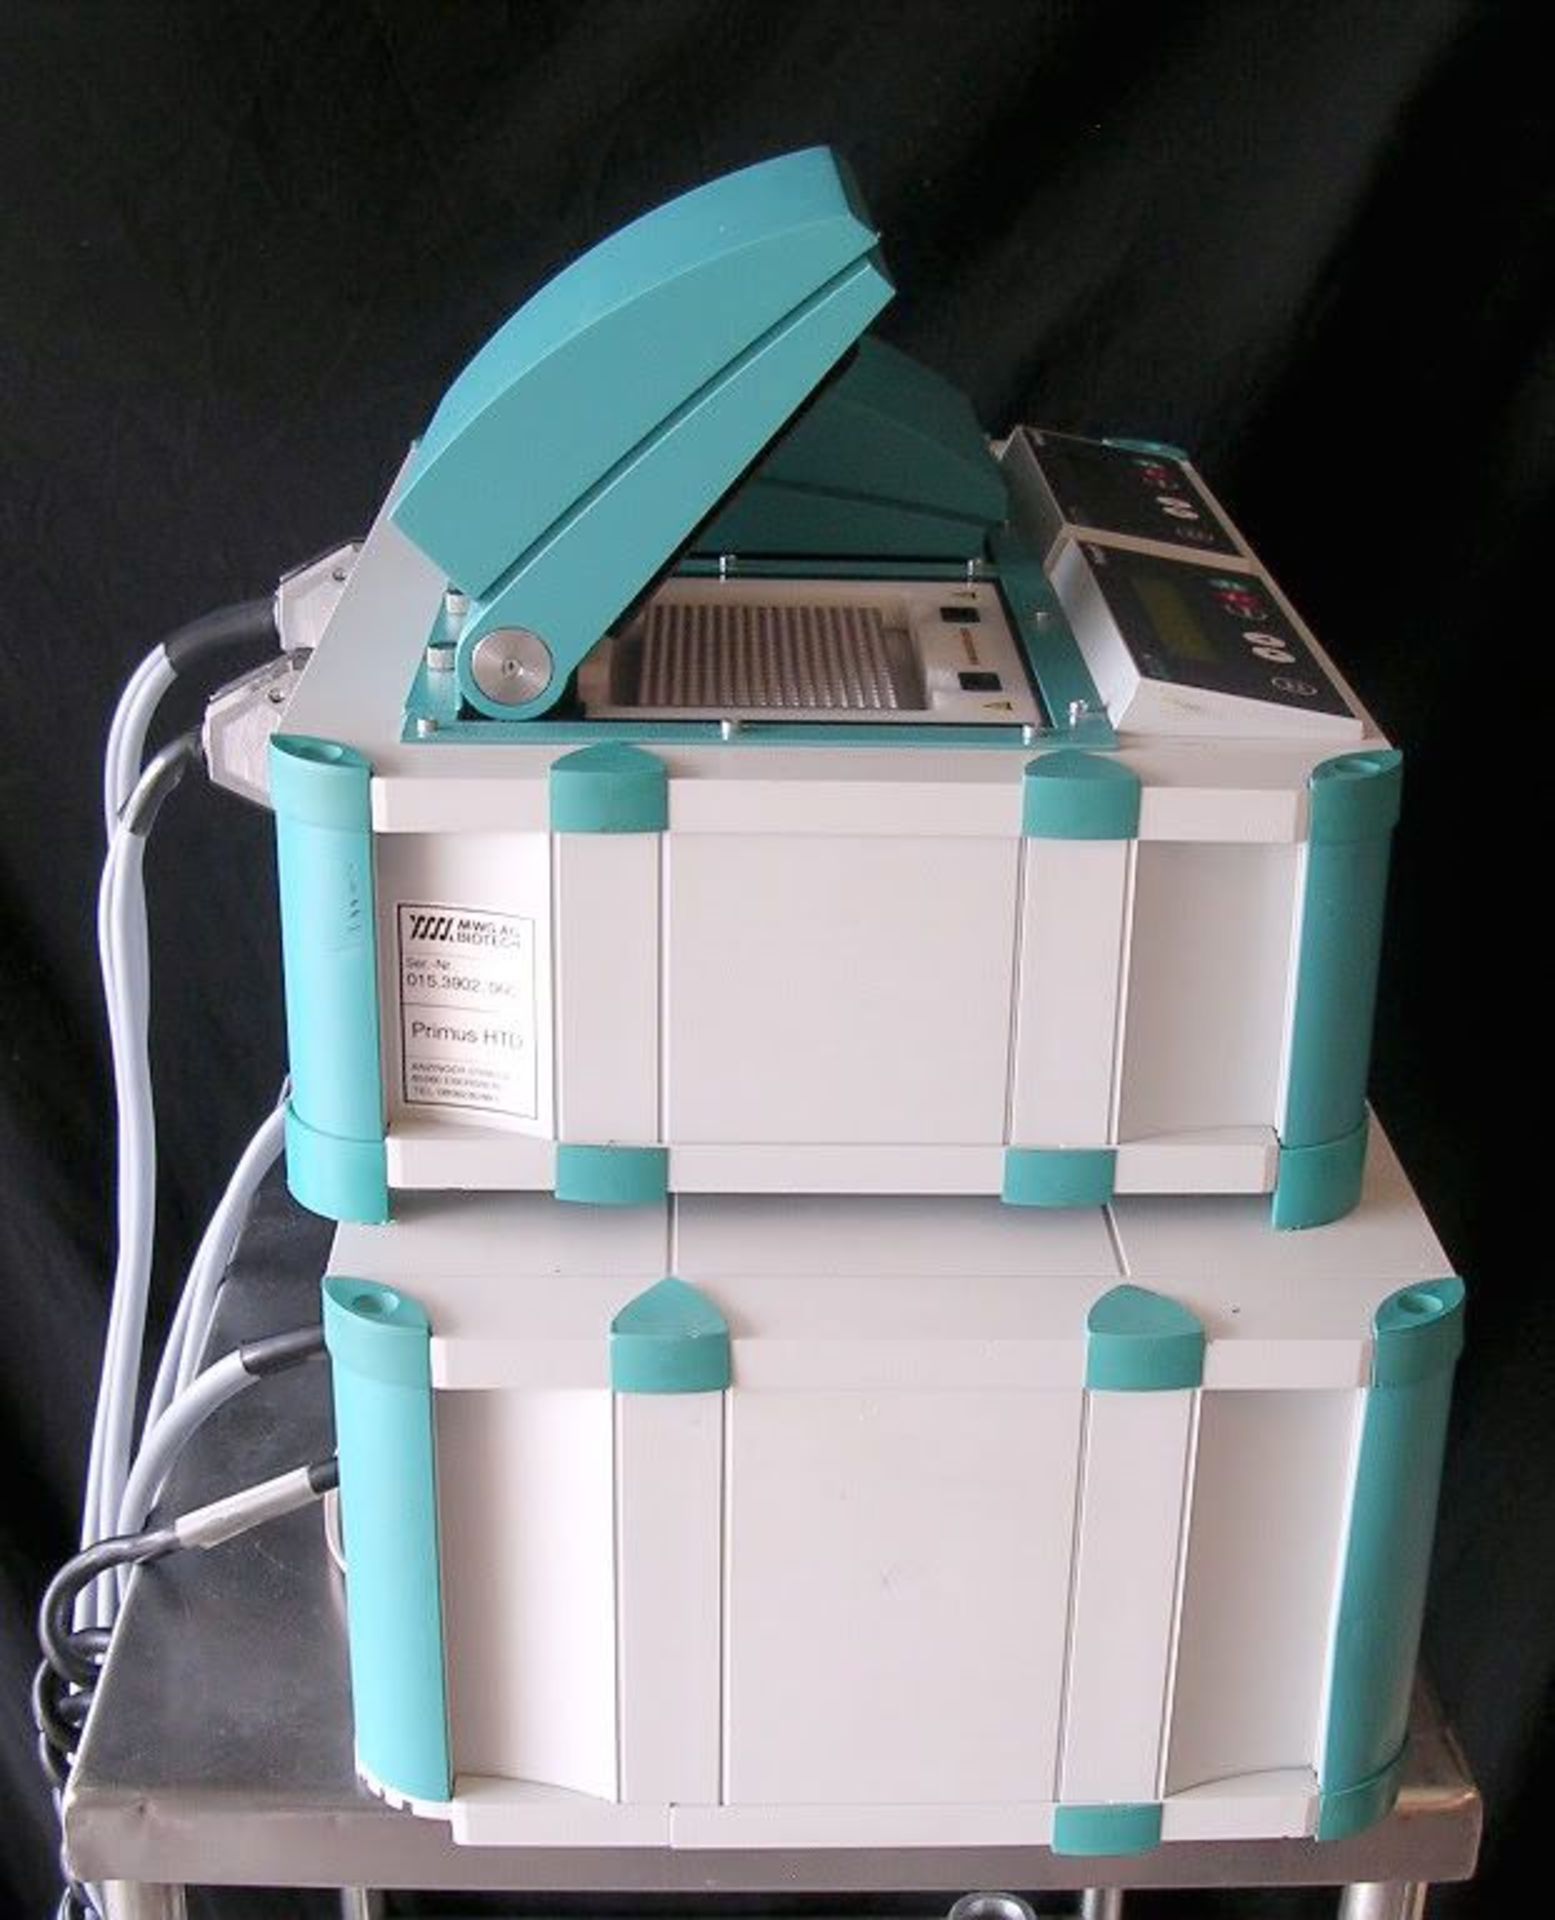 MWG AG Biotech, Primus HT Dual Thermal Cycler HTD PCR, Qty 1, 331261955760 - Image 4 of 8